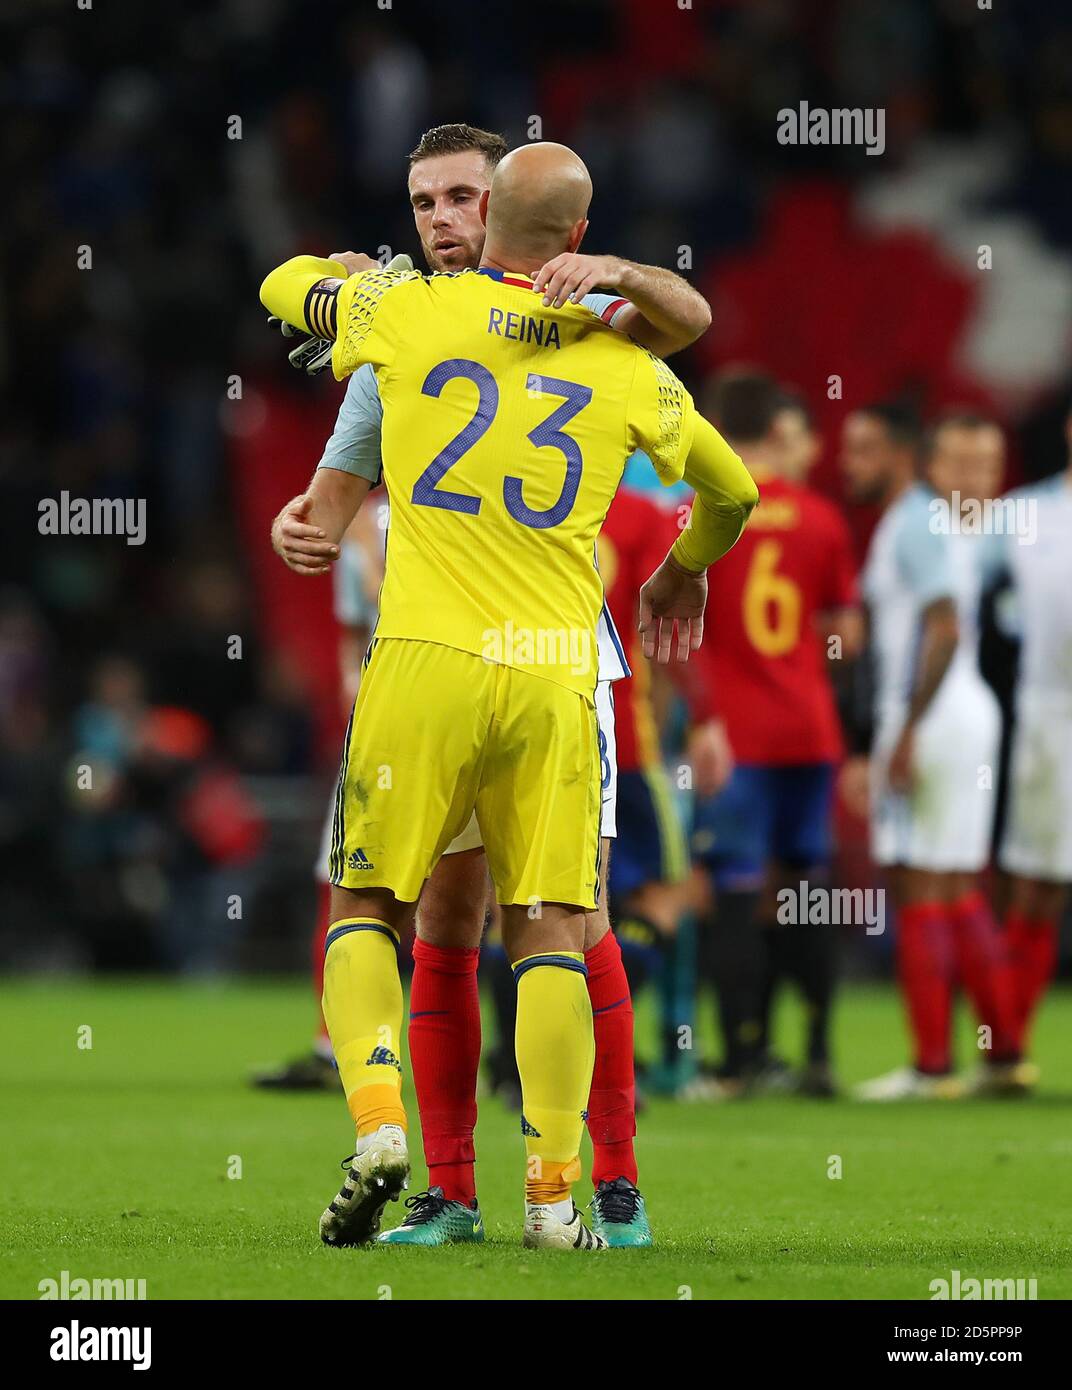 Spain goalkeeper Pepe Reina (right) hugs former club-mate England's Jordan Henderson after the game Stock Photo